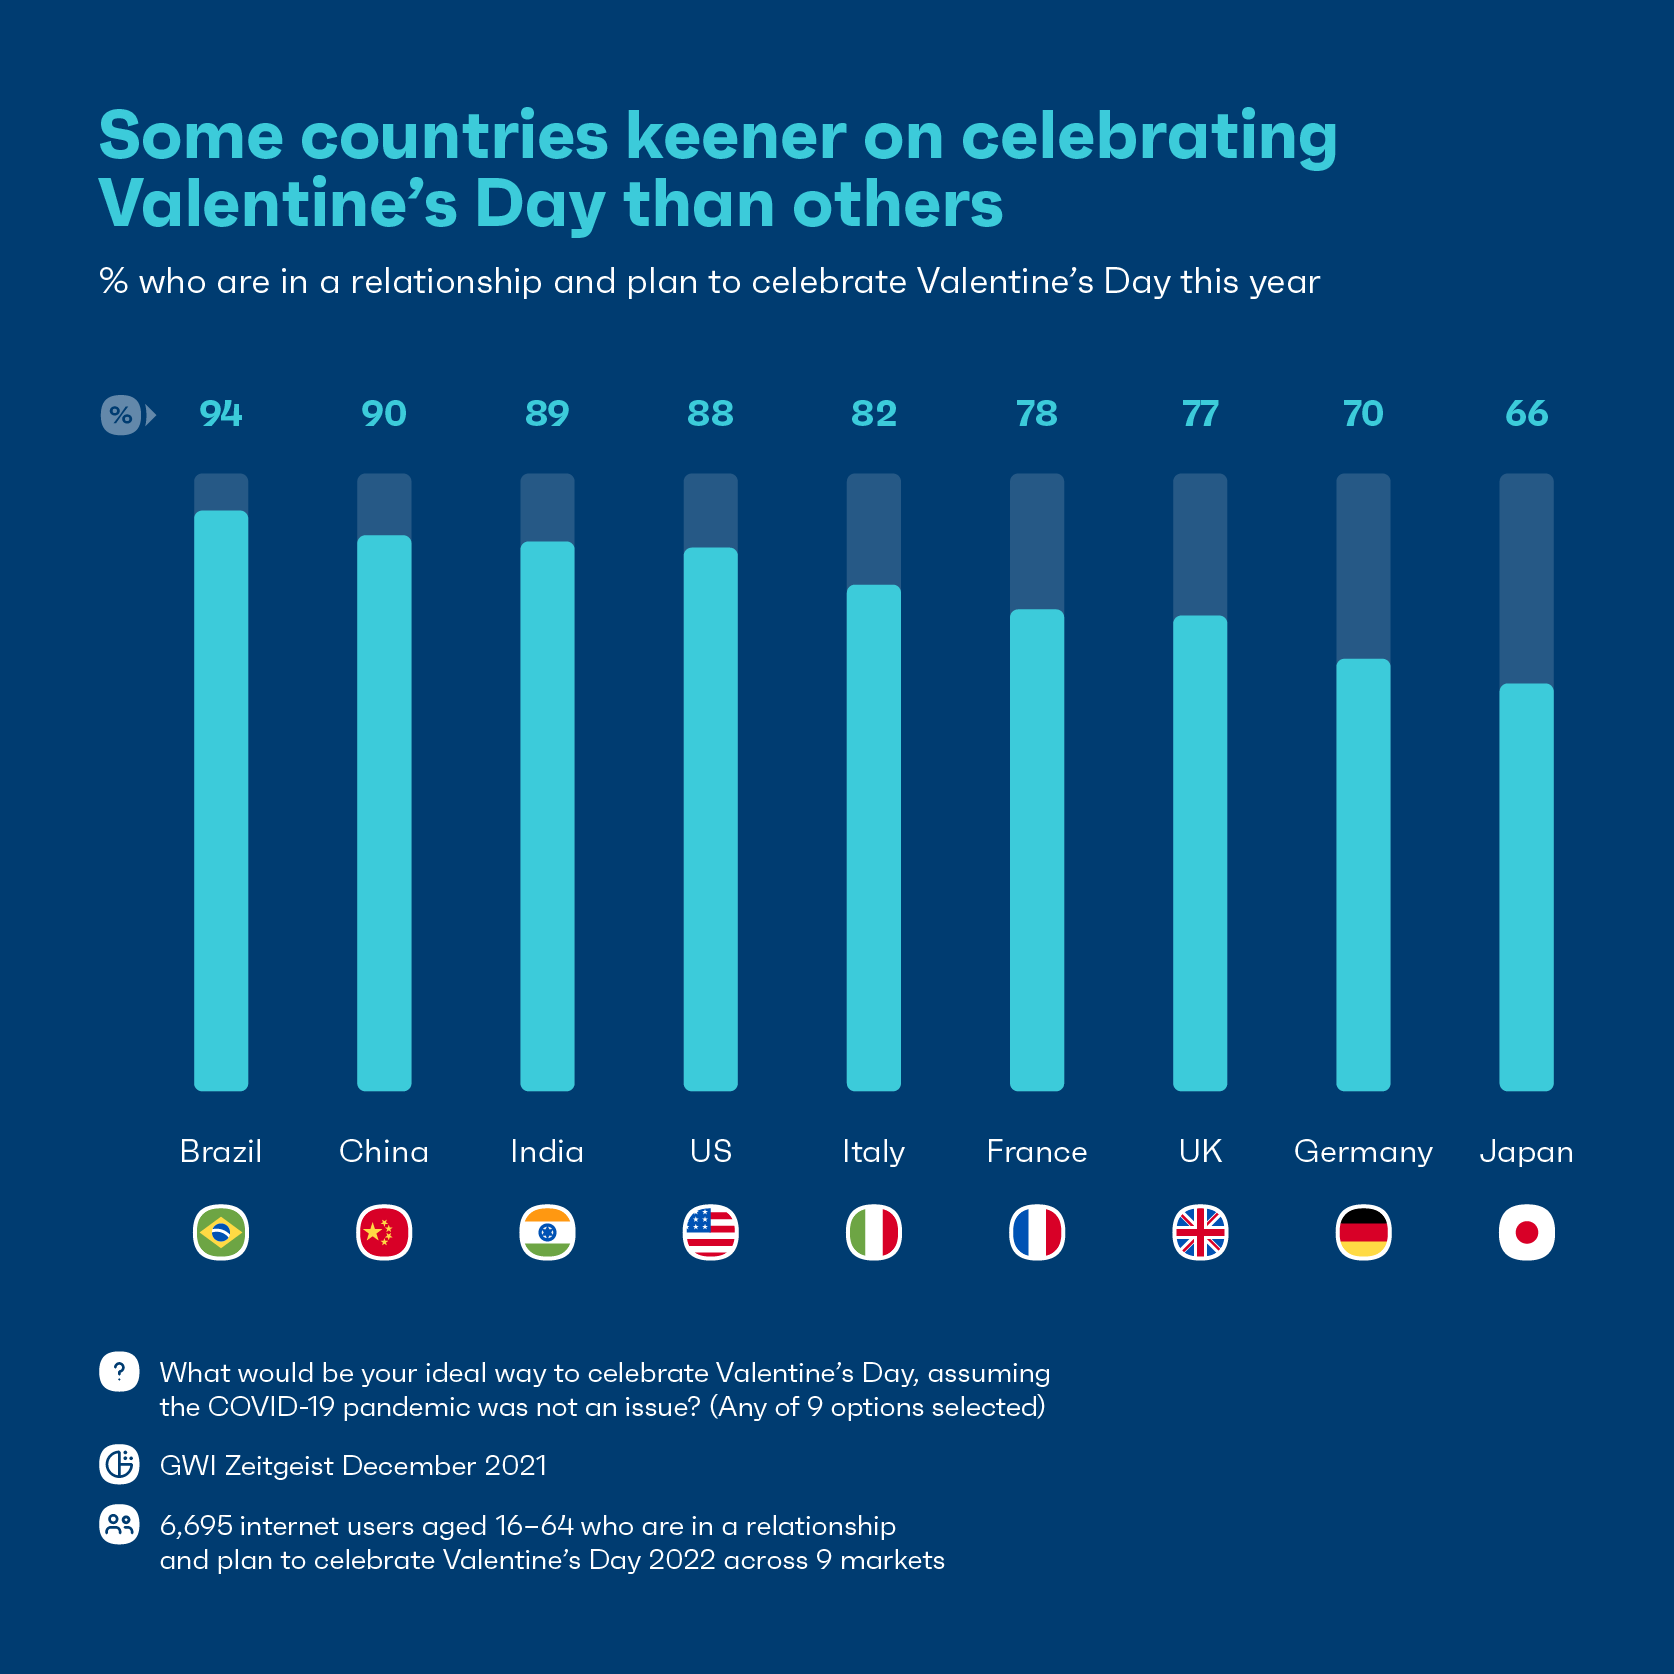 Chart showing percentage of people who will be celebrating Valentine's Day per country